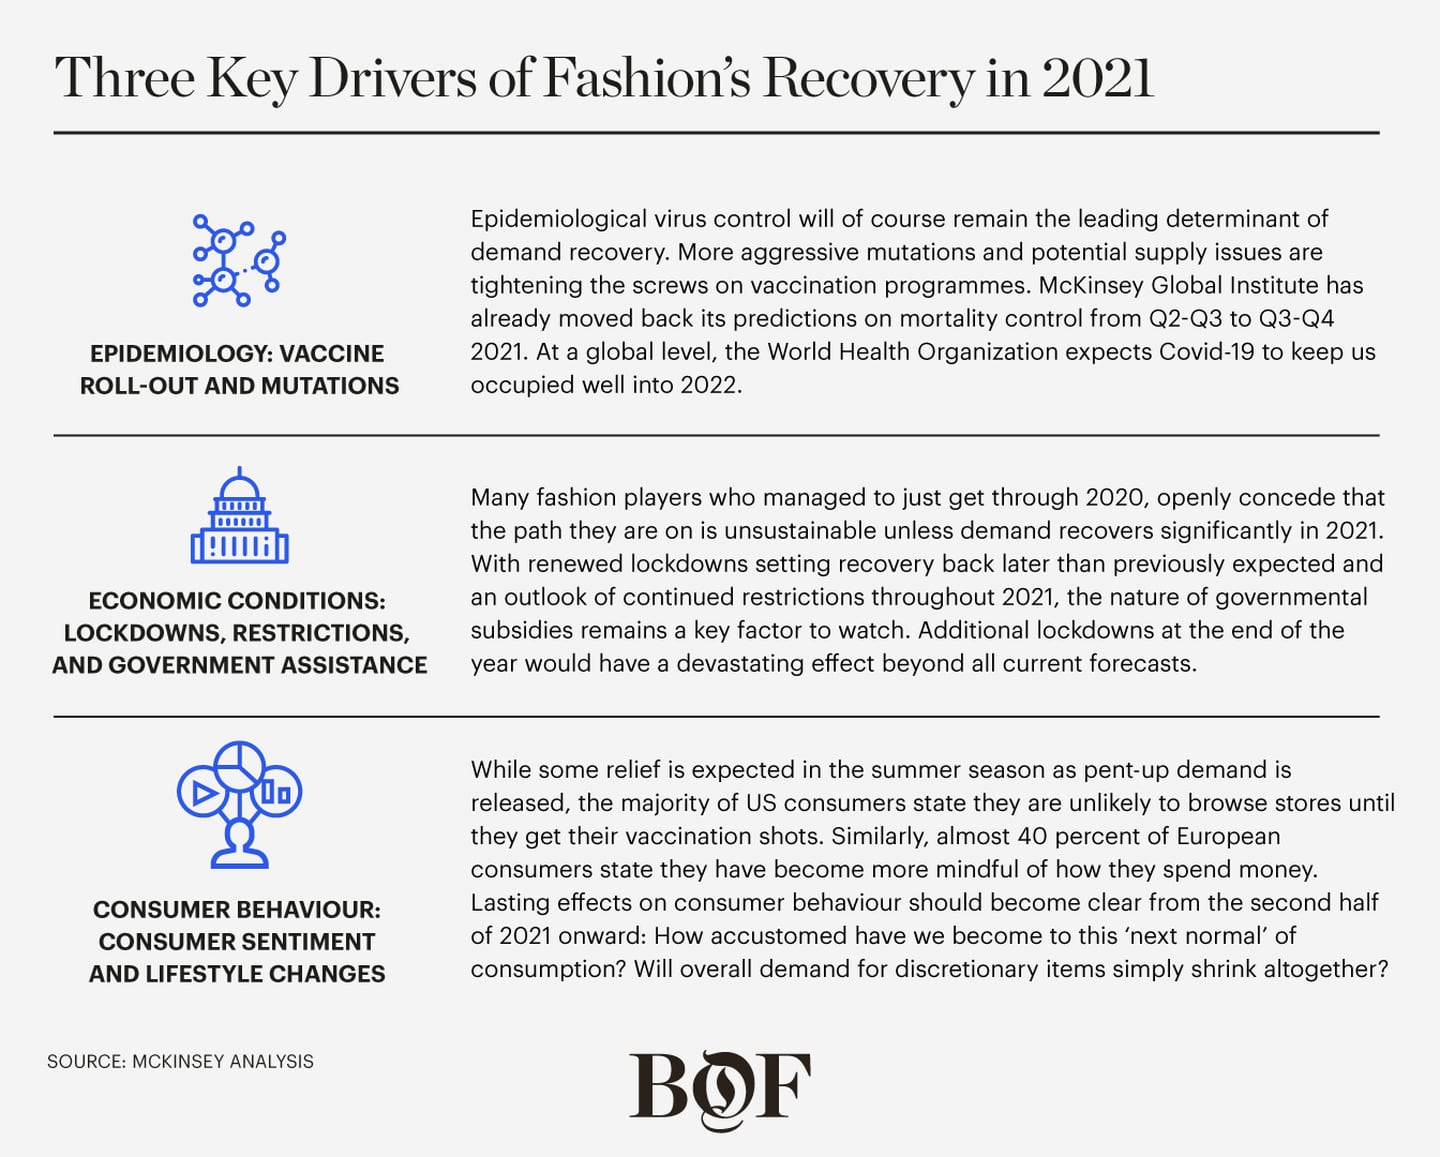 Three Key Drivers of Fashion's Recovery in 2021. McKinsey & Company.